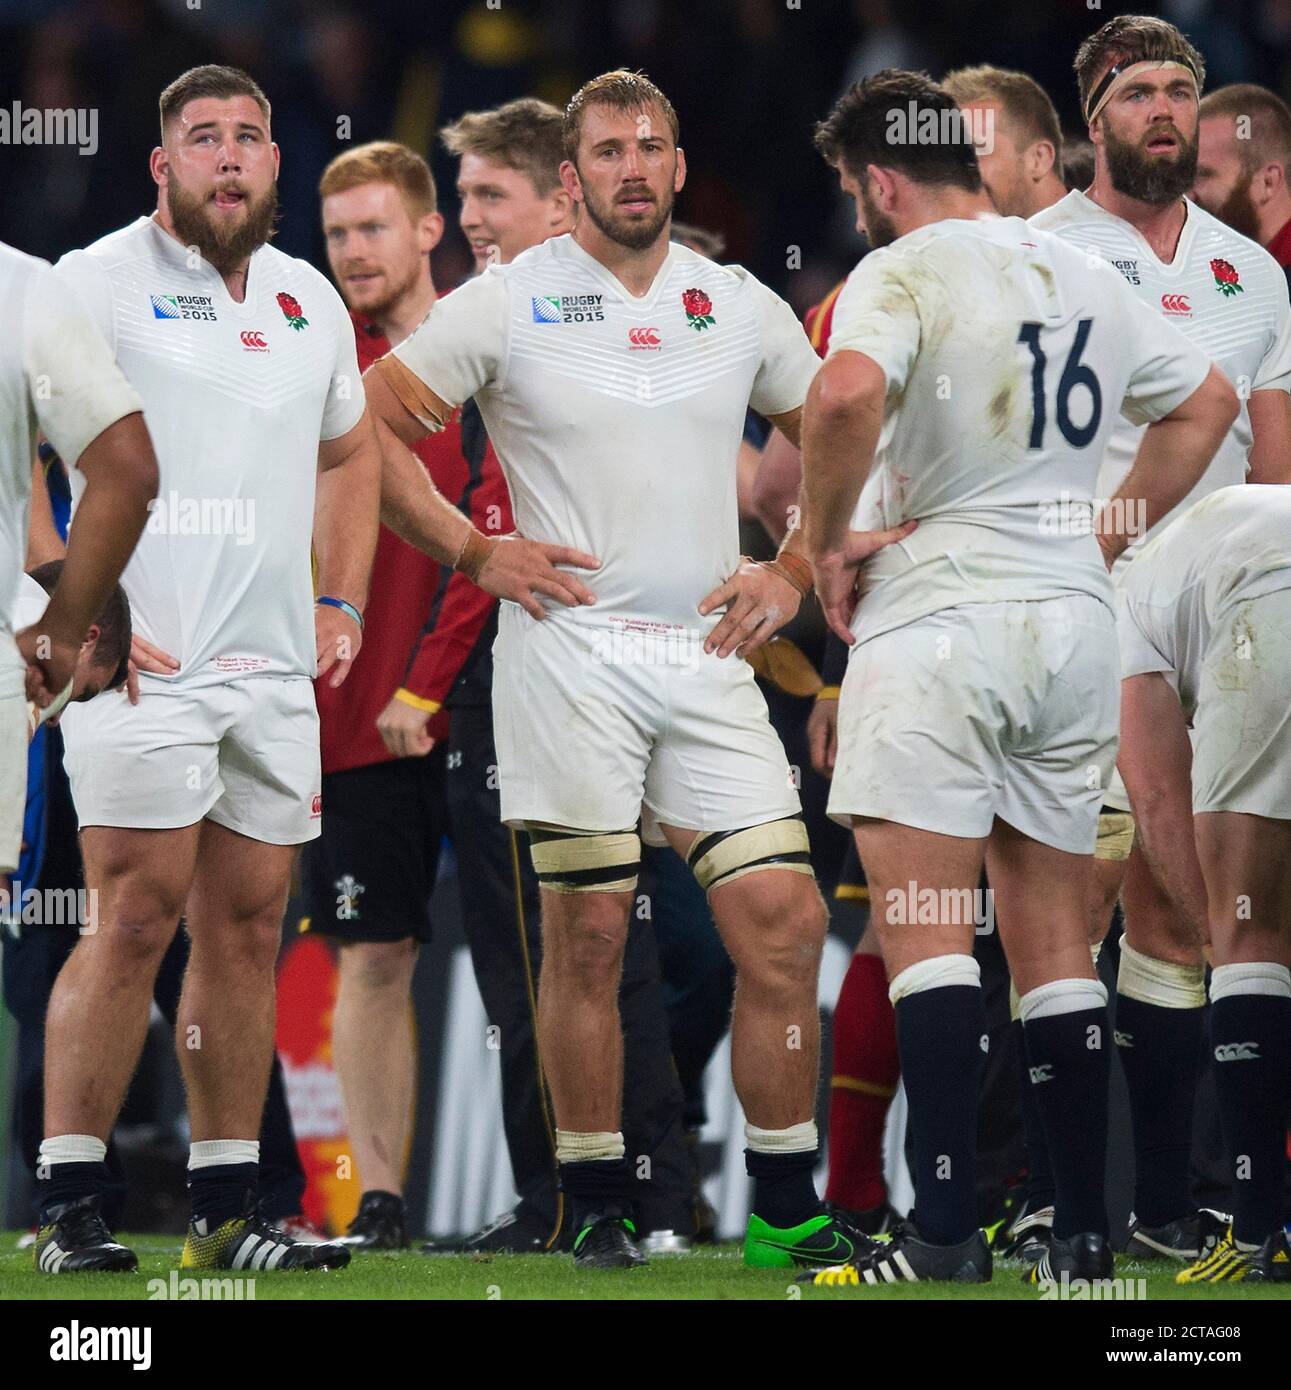 Chris Robshaw  England v Wales Rugby World Cup 2015   Picture Credit : © Mark Pain / Alamy Stock Photo